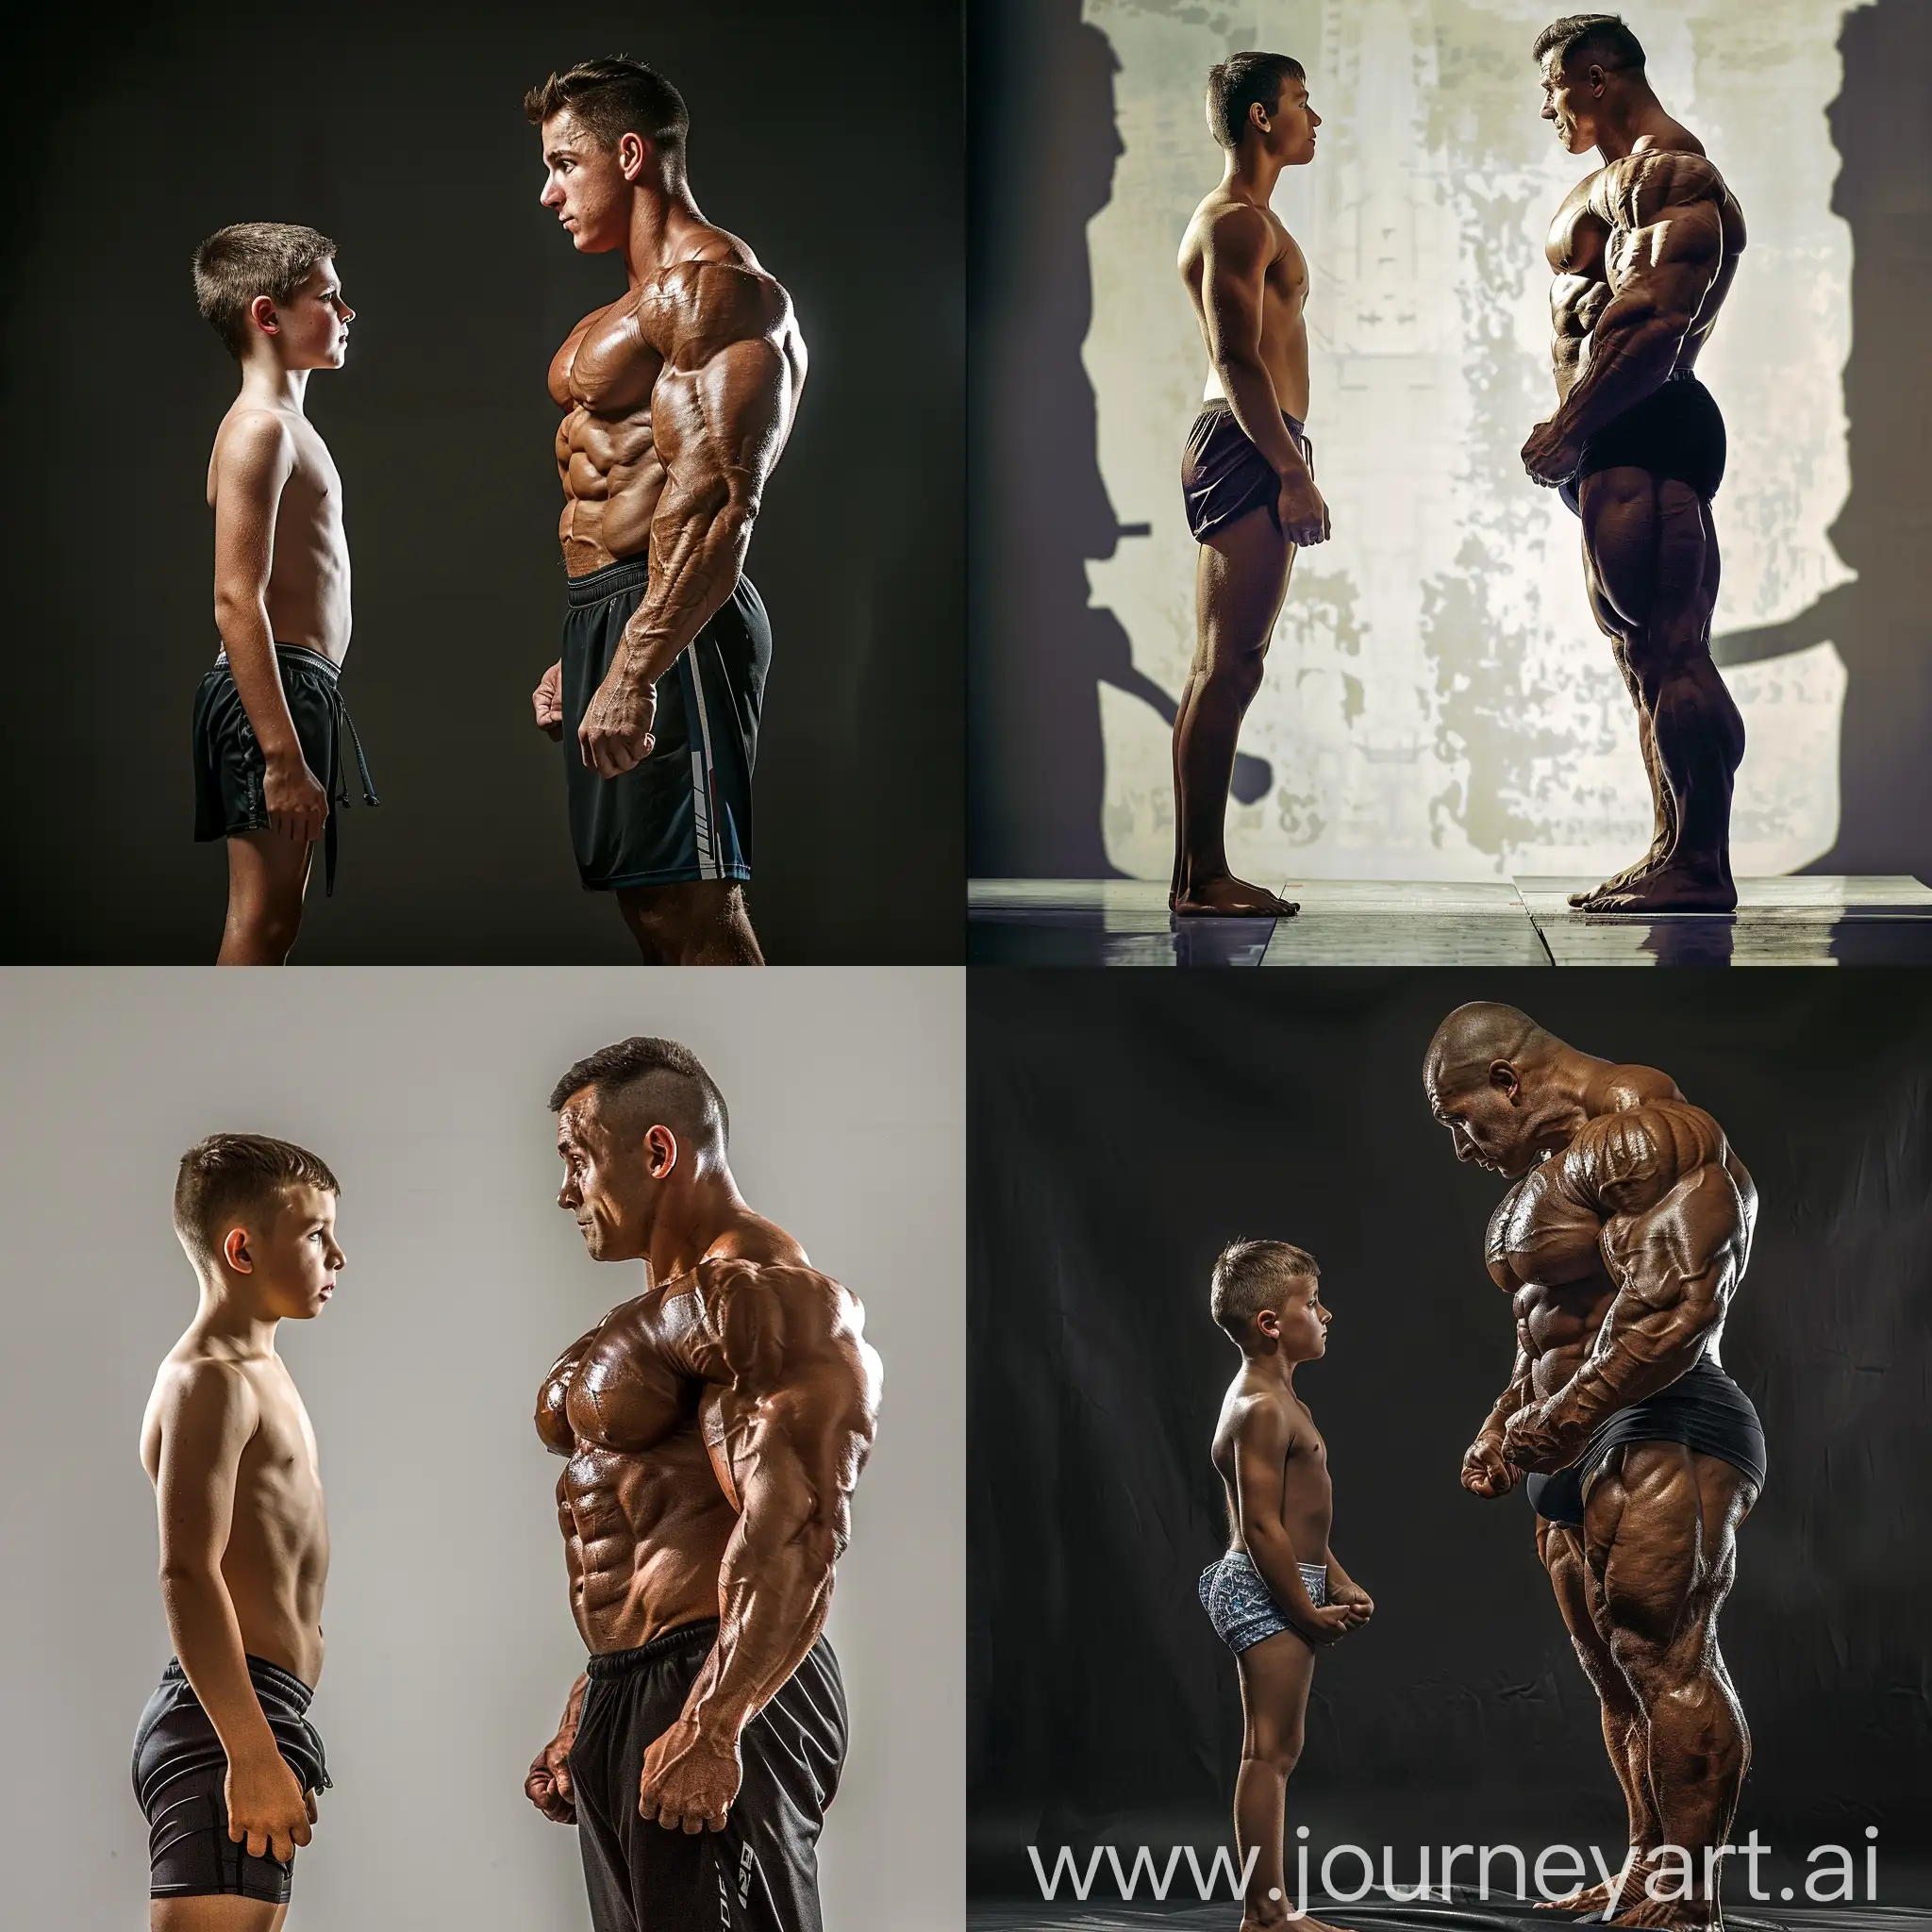 A younger brother who is thin facing his older brother who is a professional bodybuilder as they compare physiques 